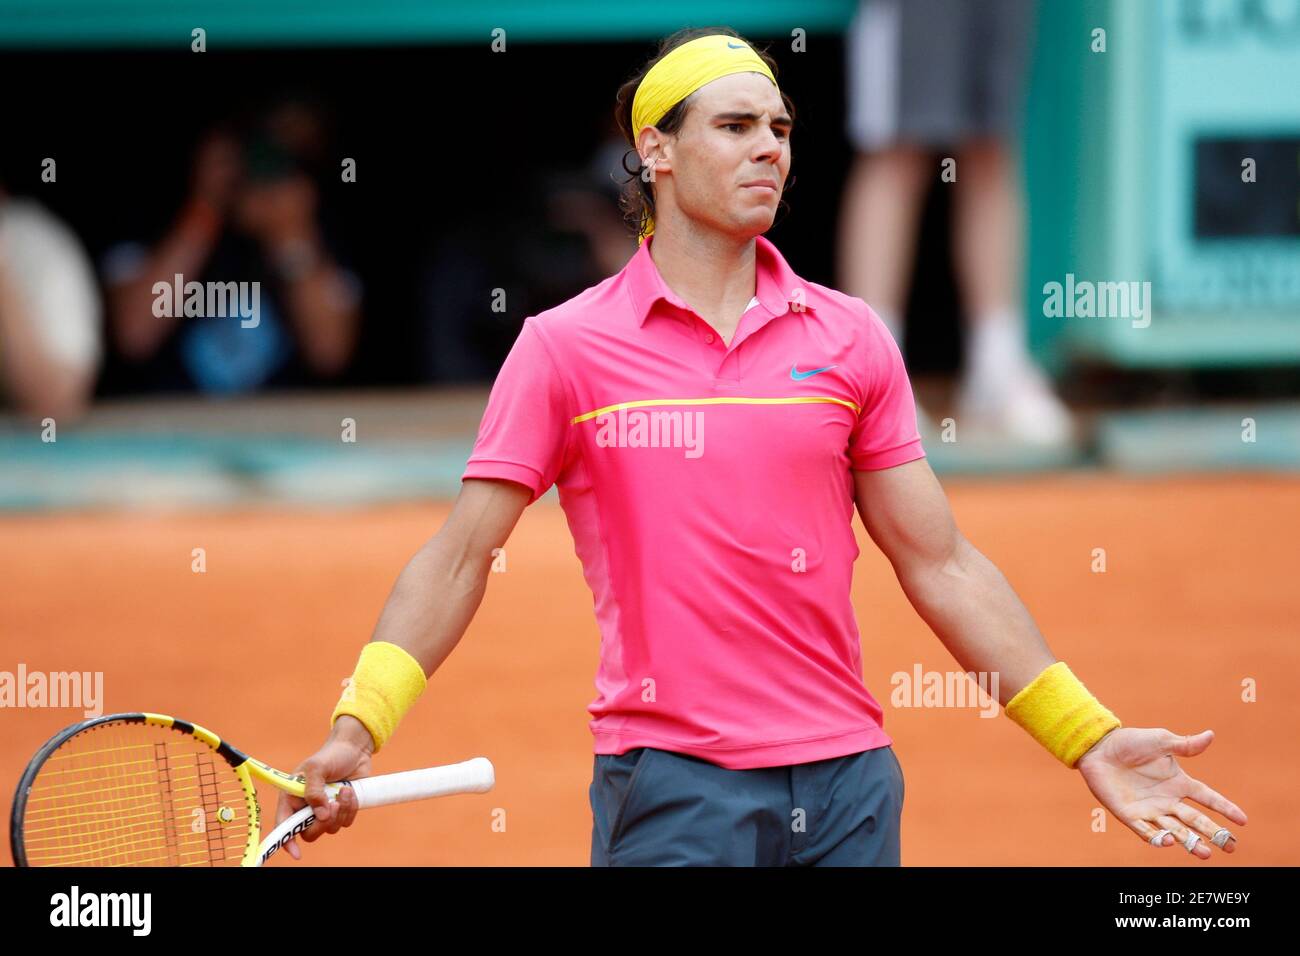 Conquest Consult Mutual Rafael Nadal of Spain reacts during his match against Robin Soderling of  Sweden at the French Open tennis tournament at Roland Garros in Paris May  31, 2009. REUTERS/Charles Platiau (FRANCE SPORT TENNIS